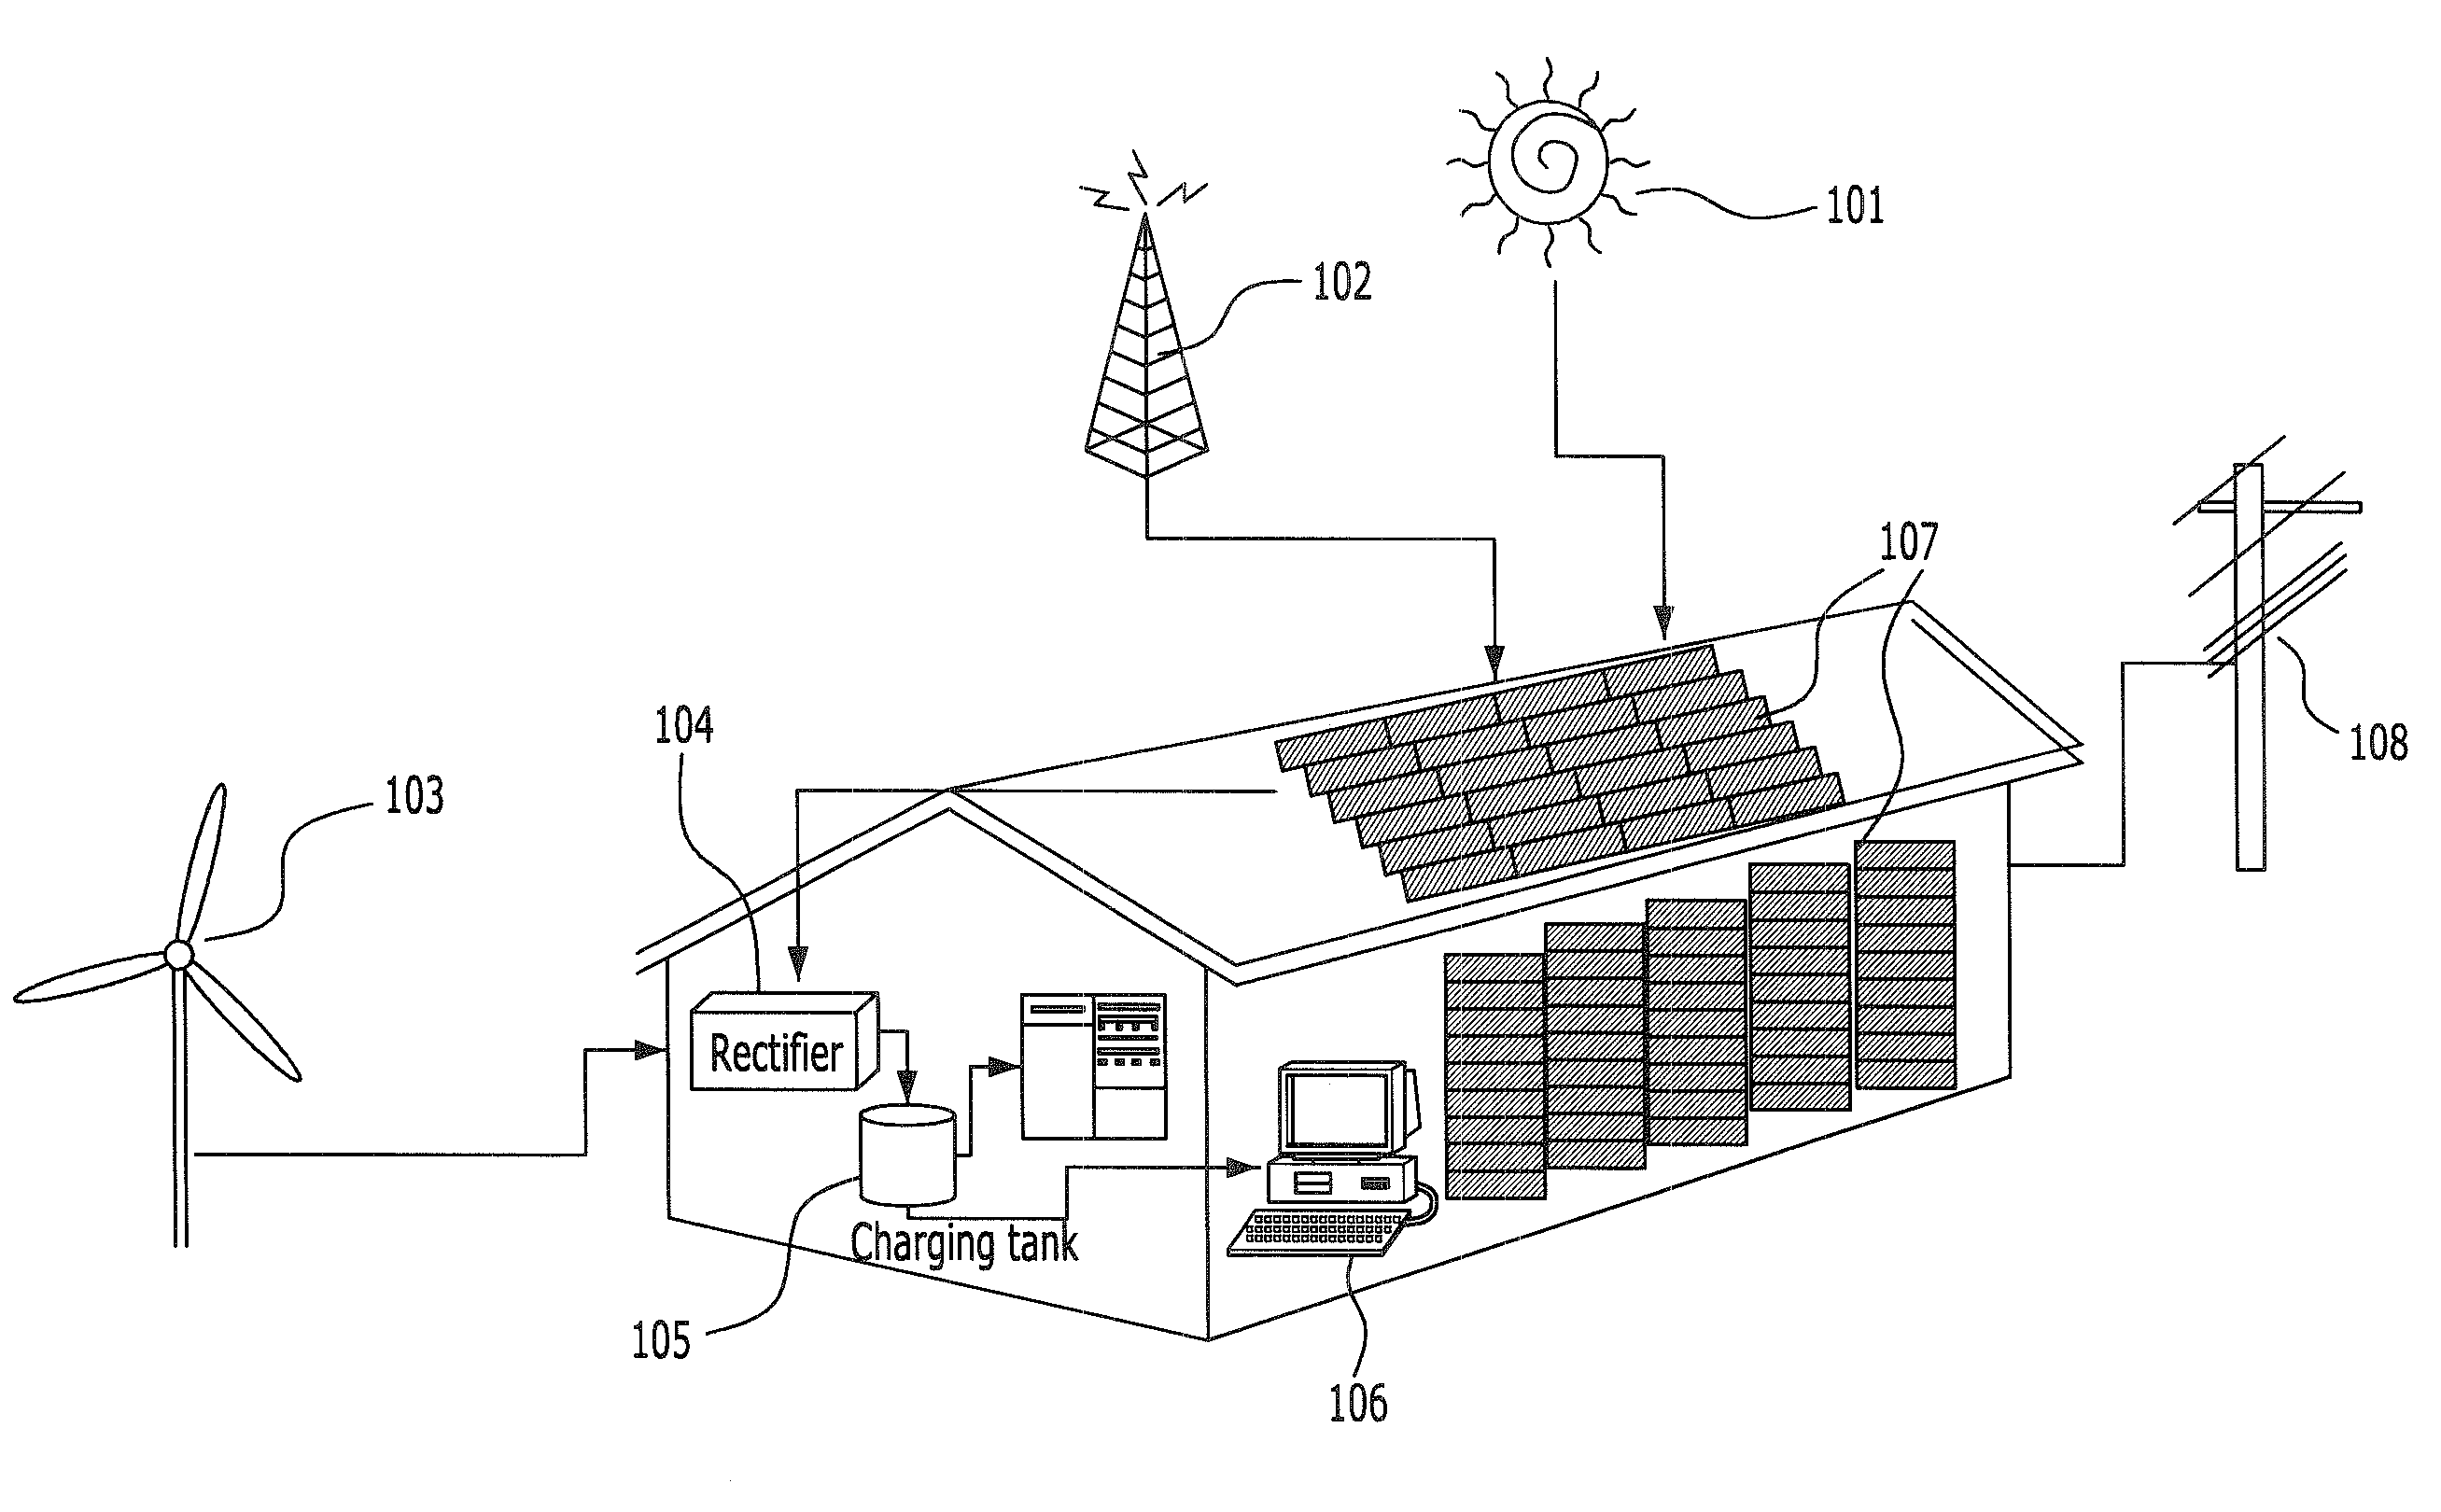 Apparatus for harvesting energy from microwave